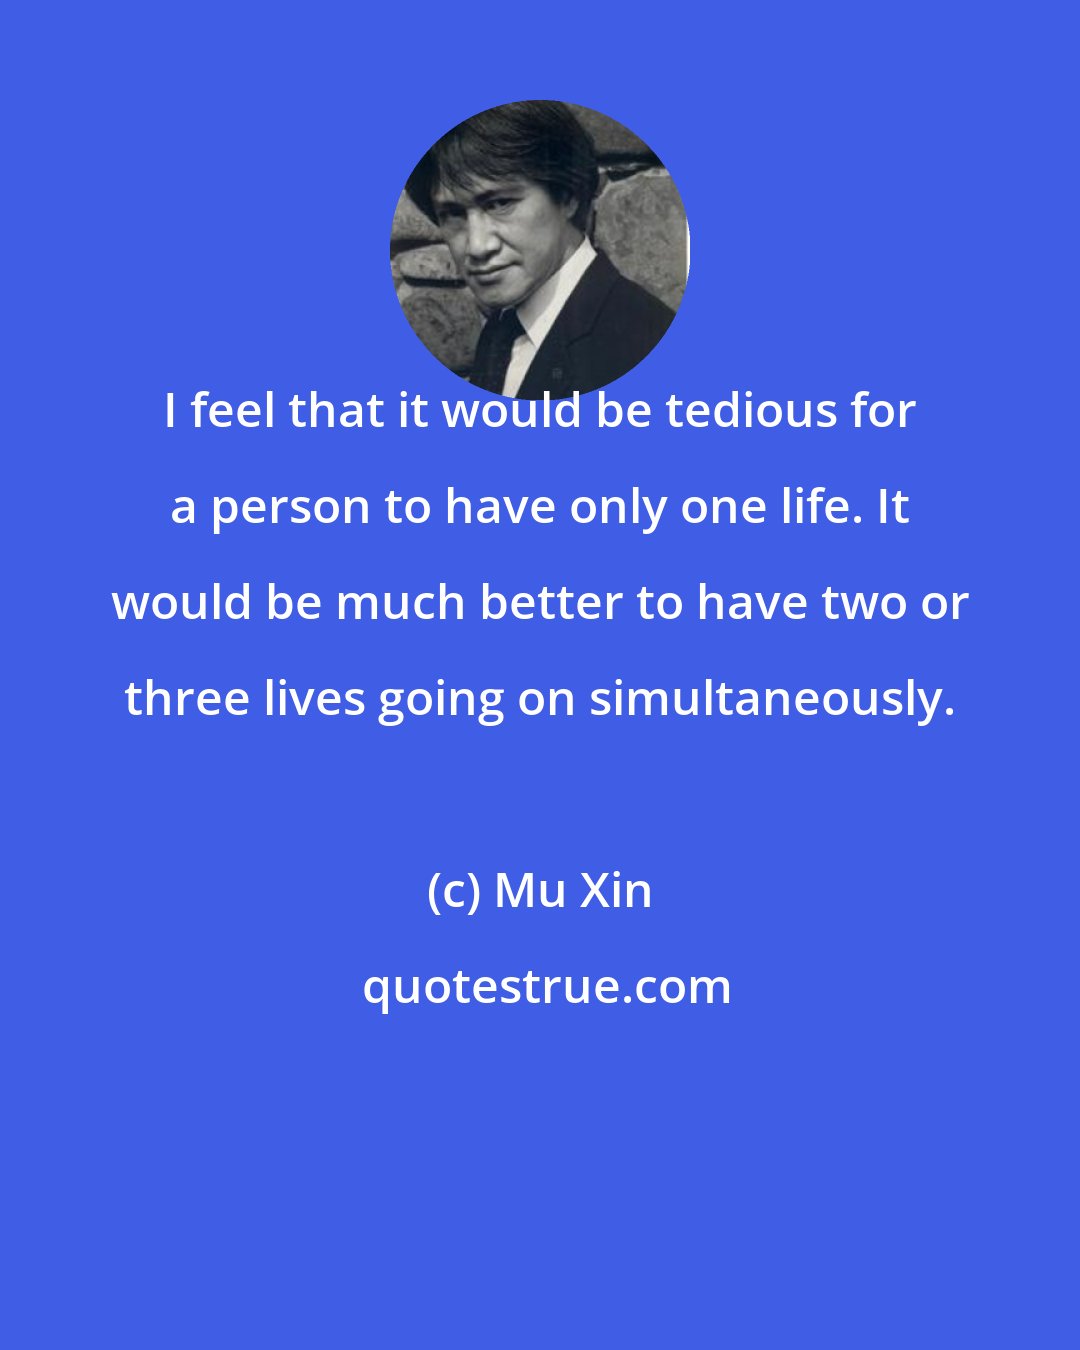 Mu Xin: I feel that it would be tedious for a person to have only one life. It would be much better to have two or three lives going on simultaneously.